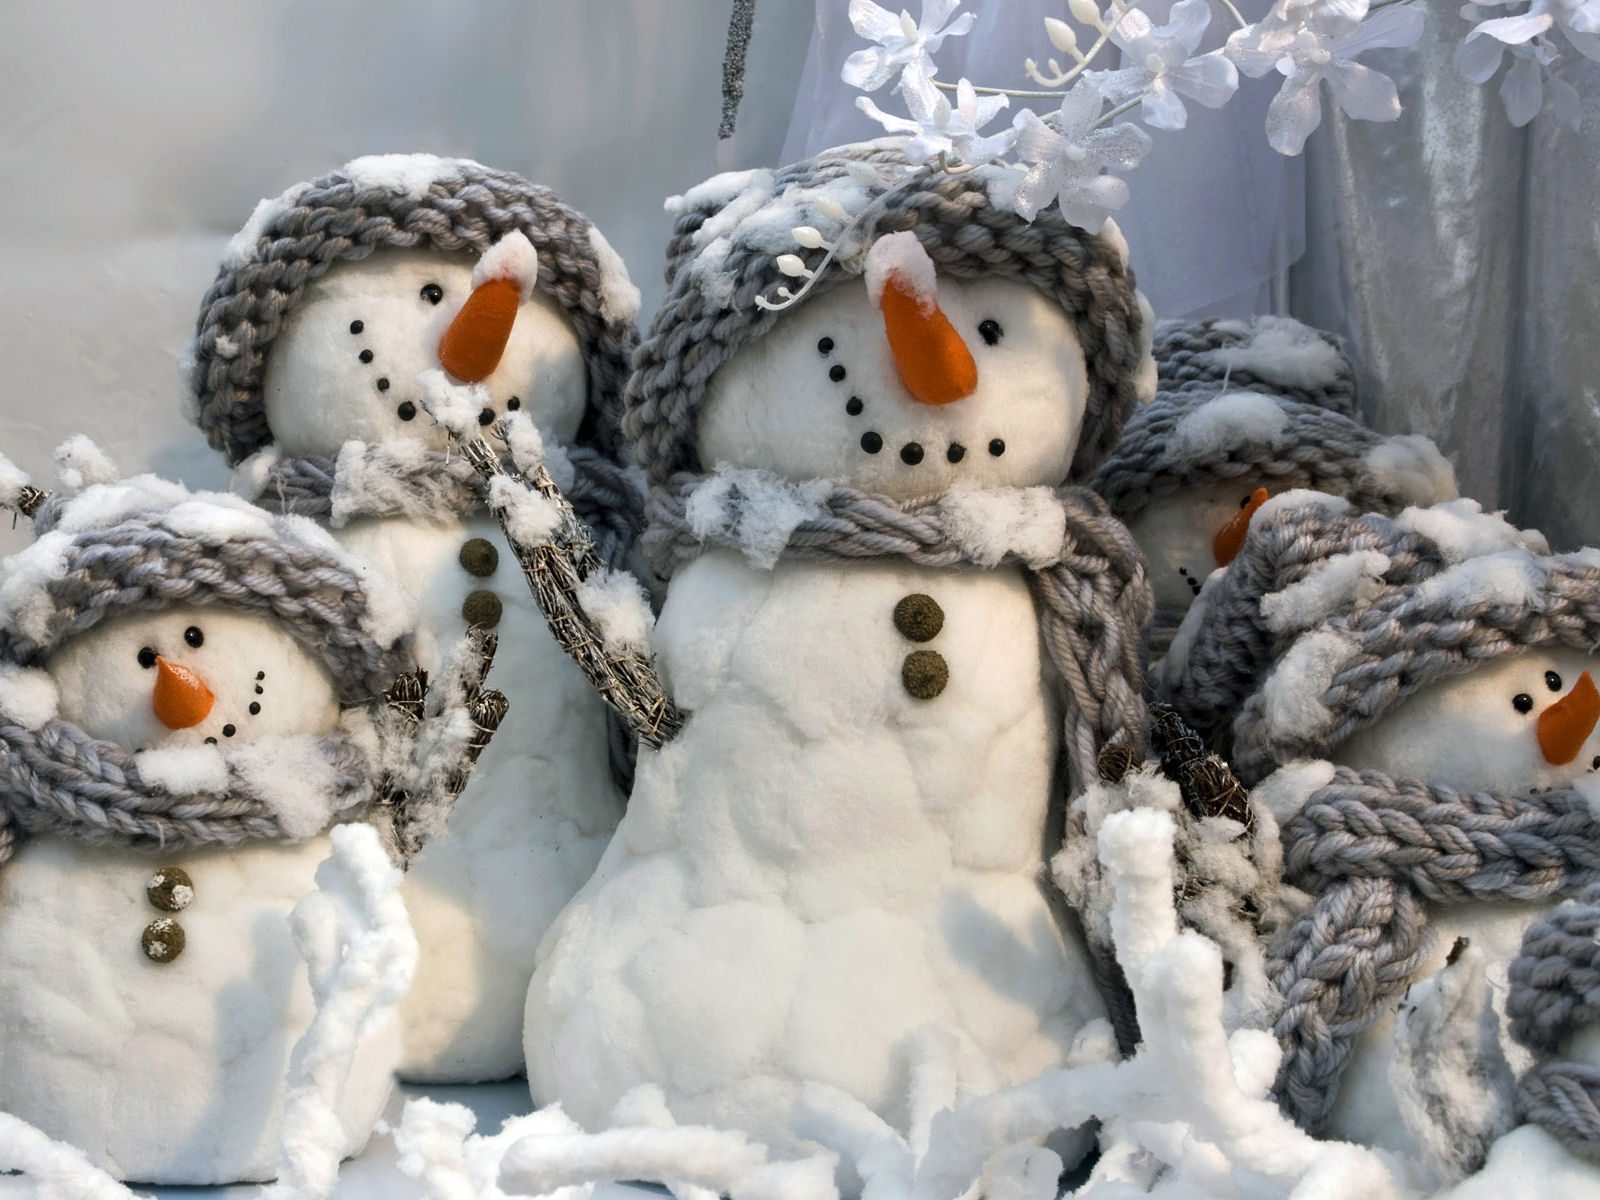 HD Free Snowman Wallpapers | Download Free - 813321